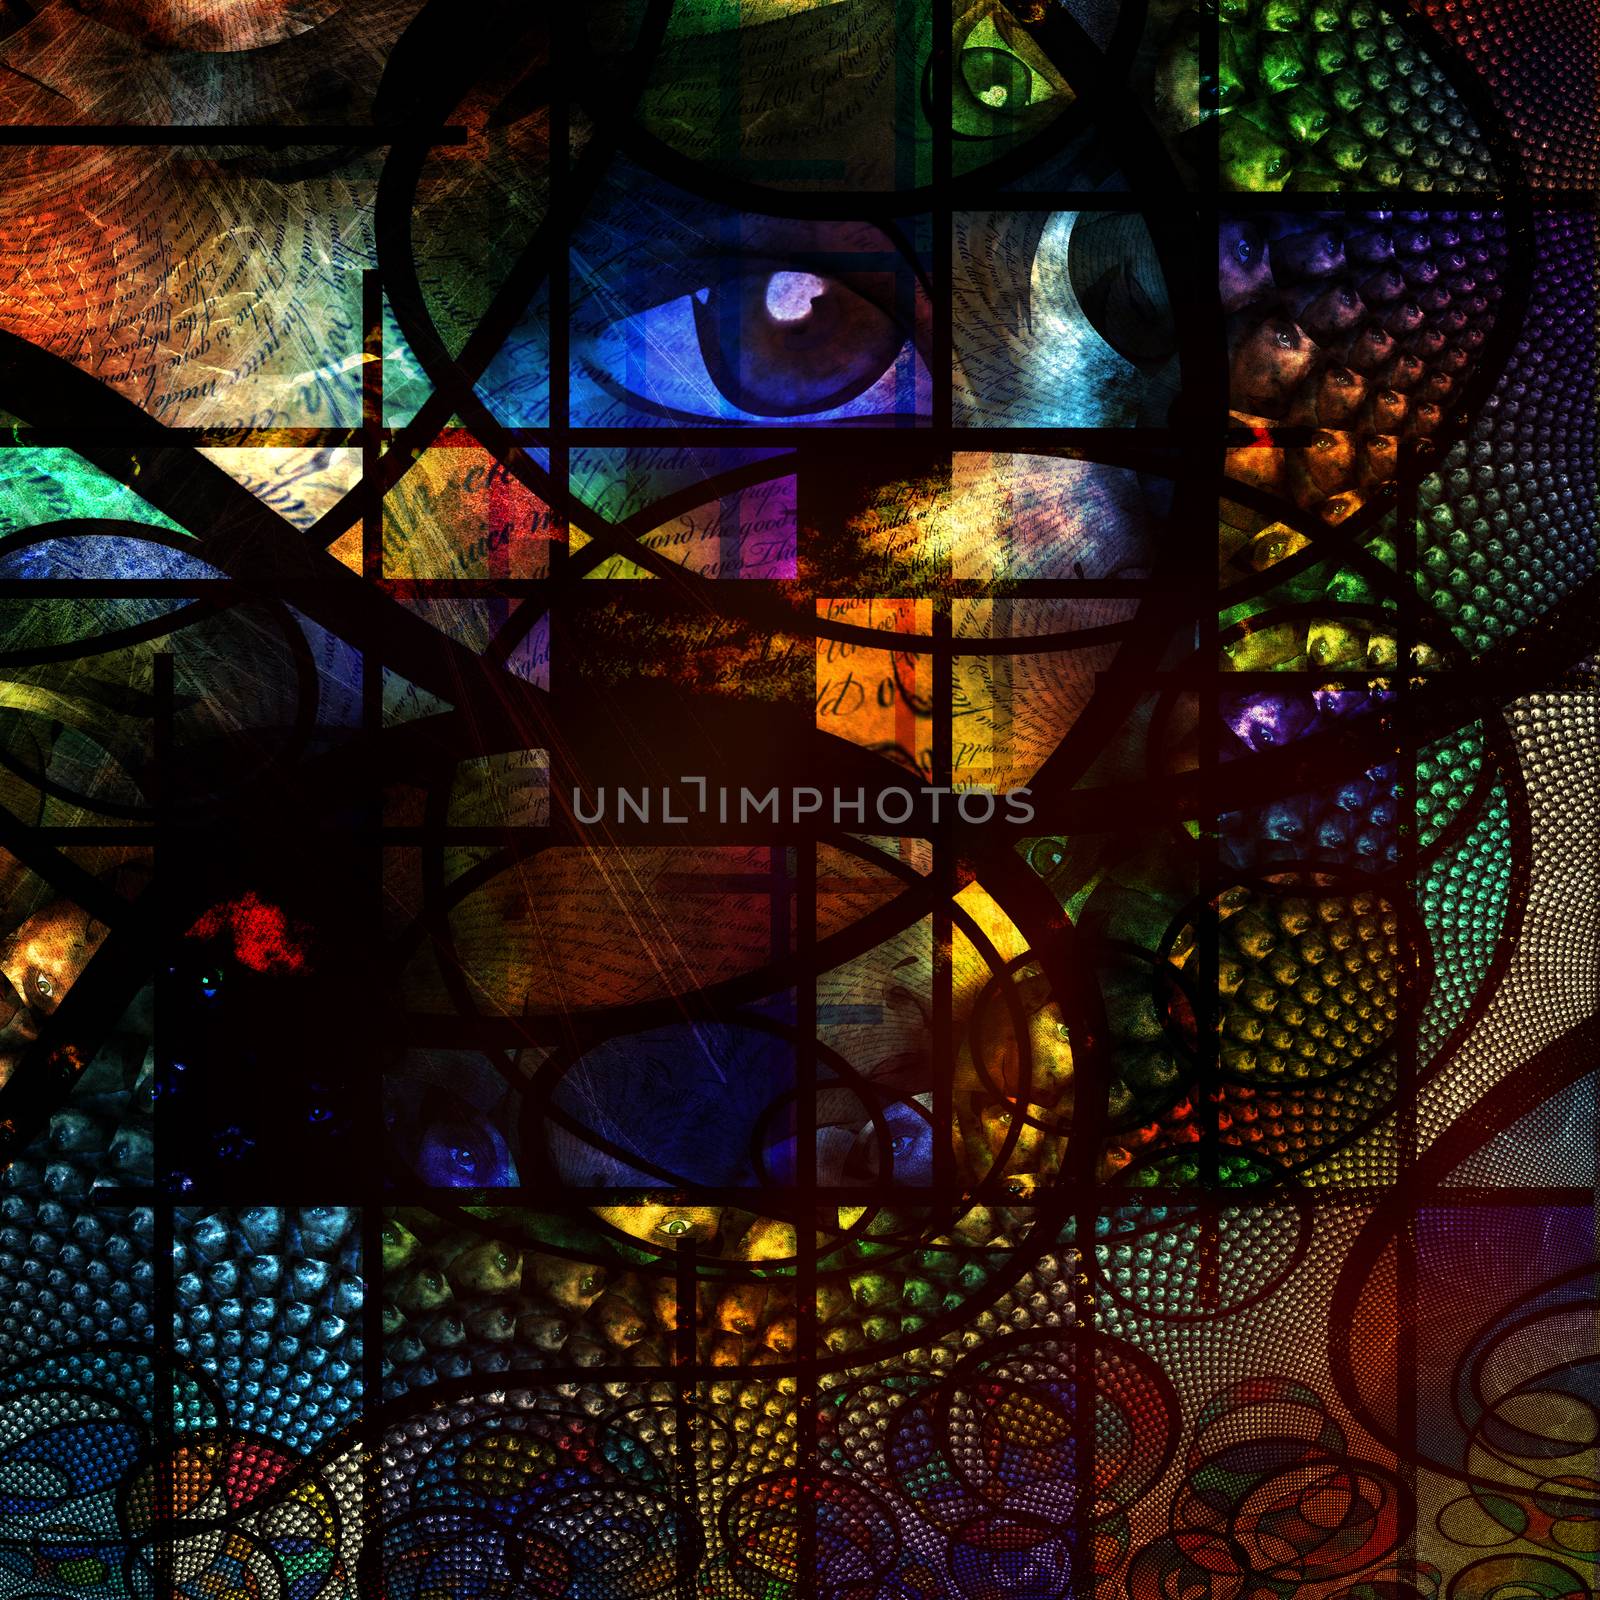 Abstract Image with text and human eye